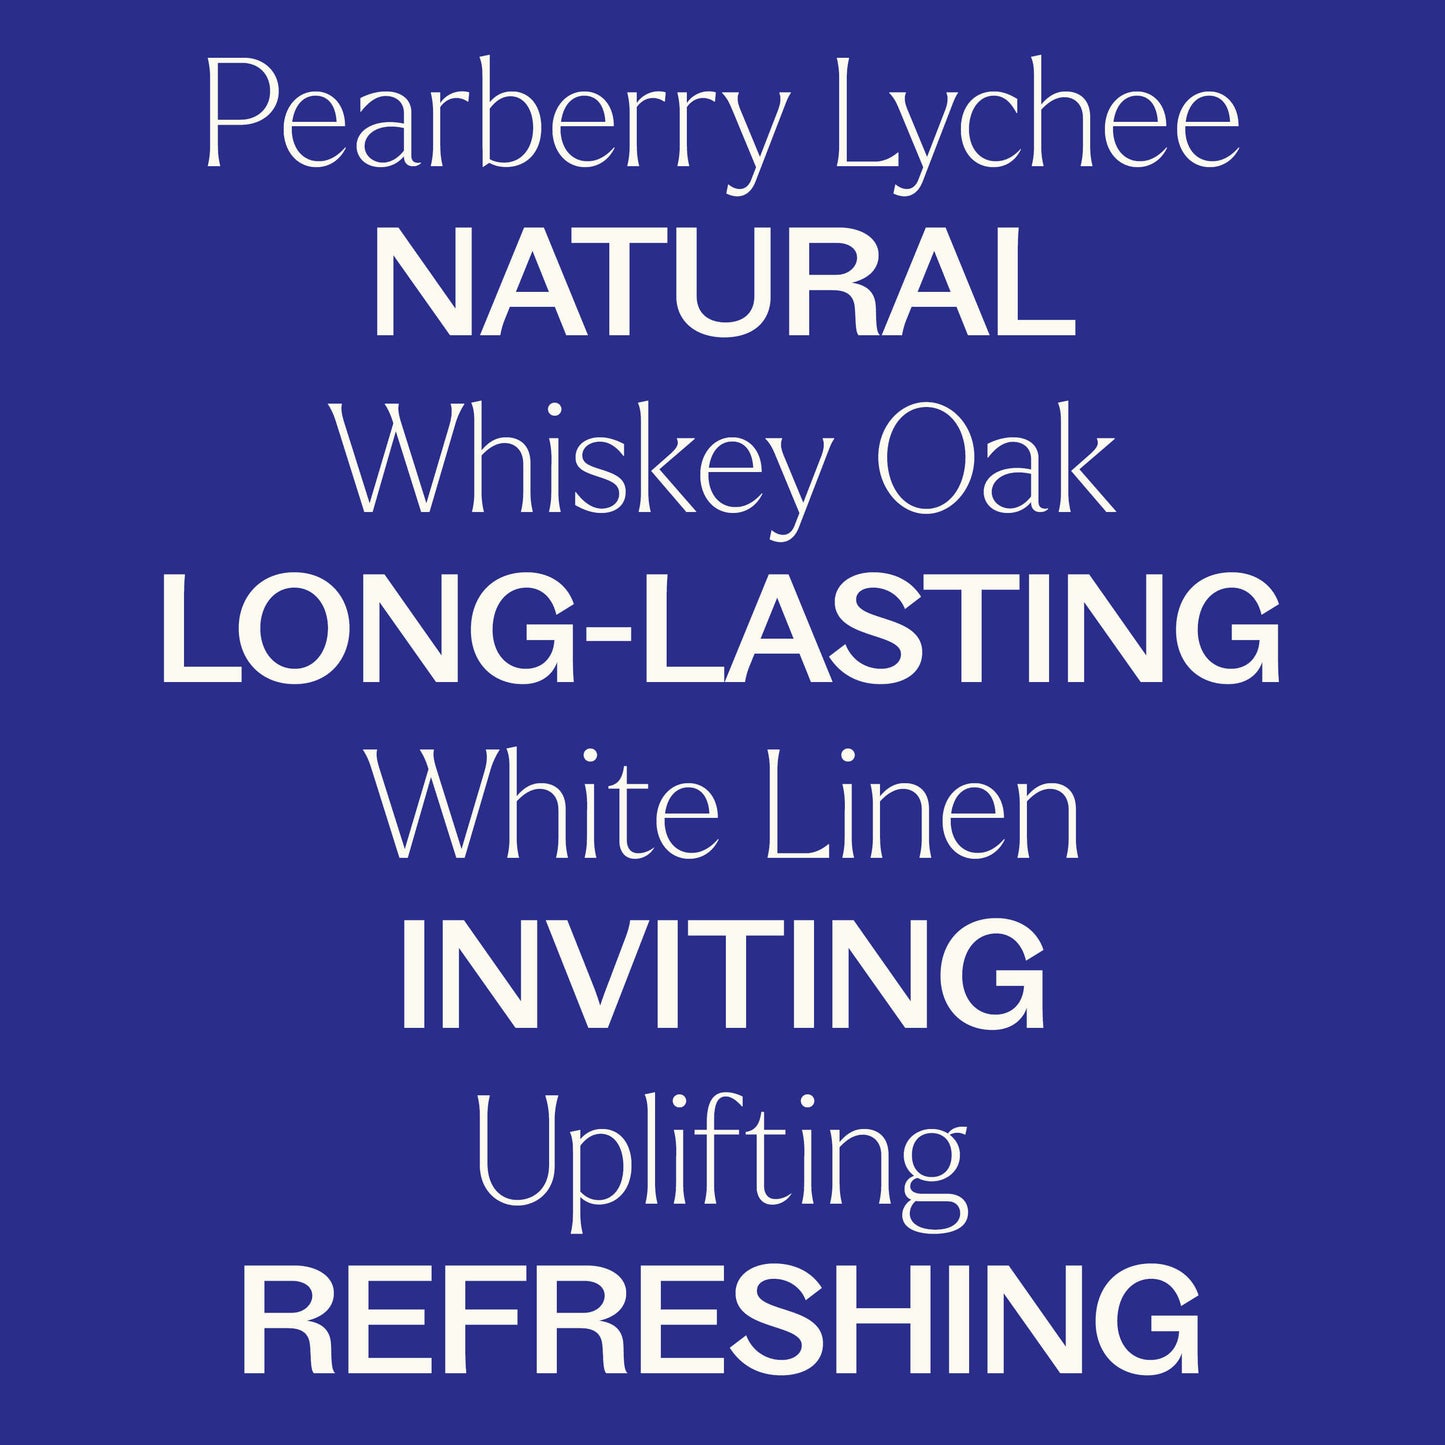 Pearberry lychee, whiskey oak, white linen. Uplifting, natural, long-lasting, inviting, refreshing